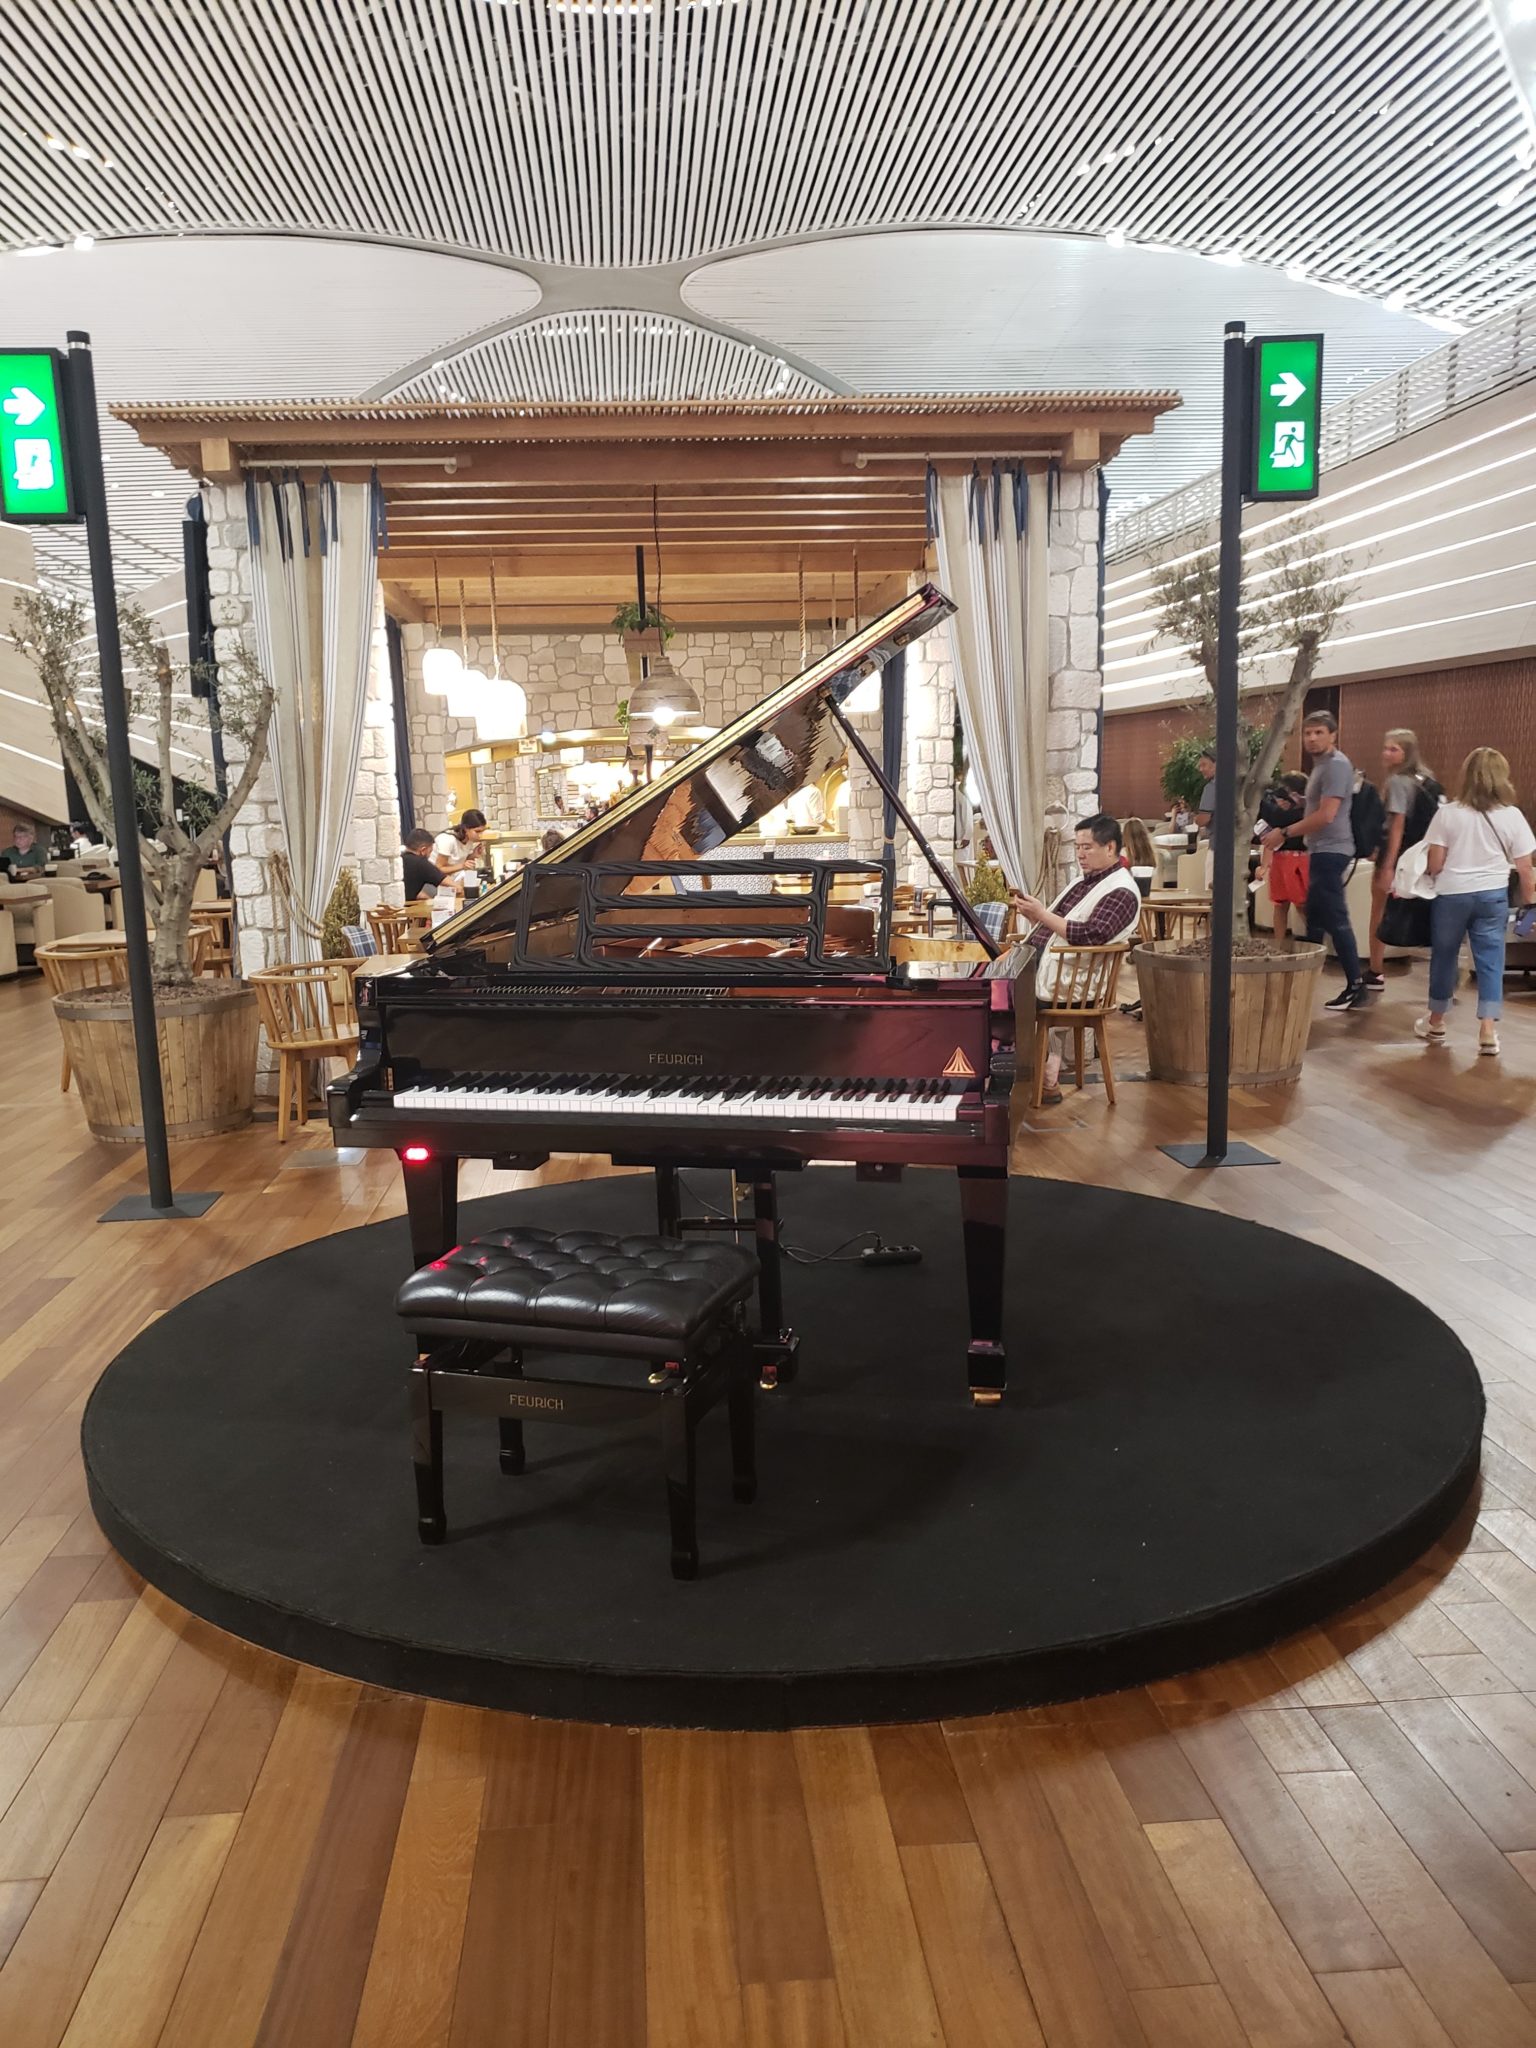 a piano on a circular platform in a room with people